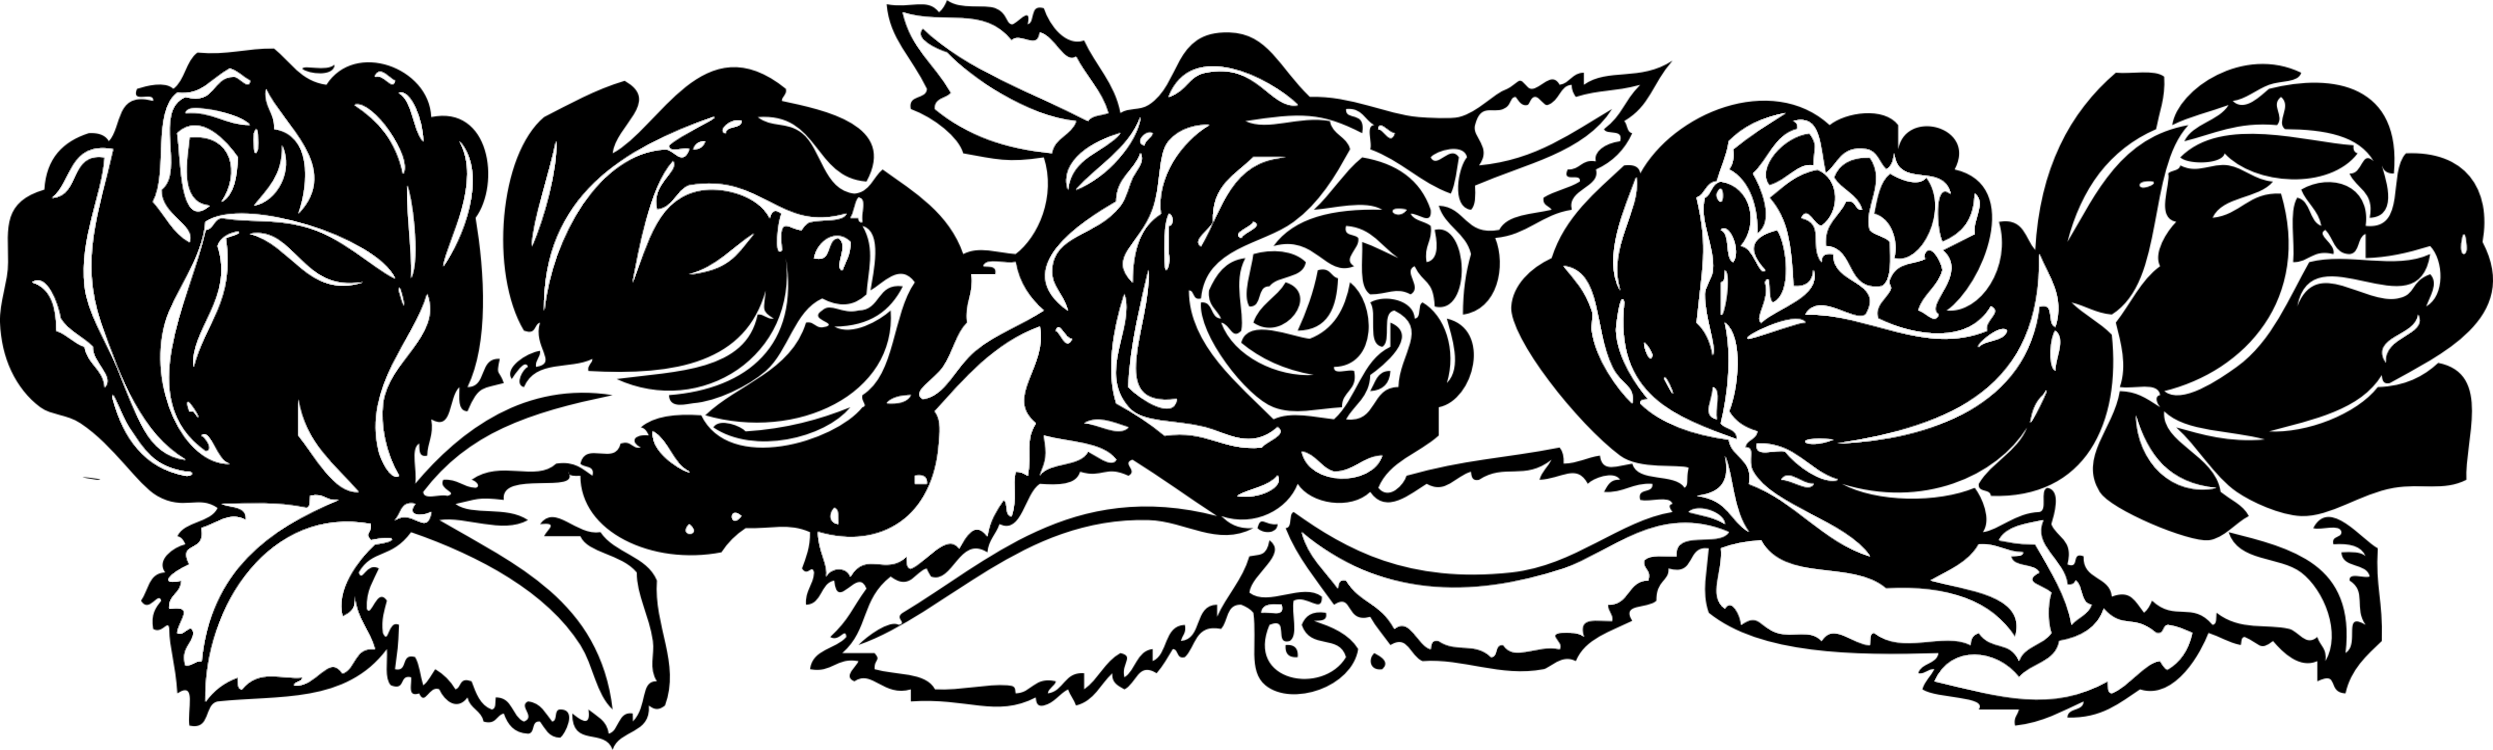 Black Rose Silhouette Graphic PNG